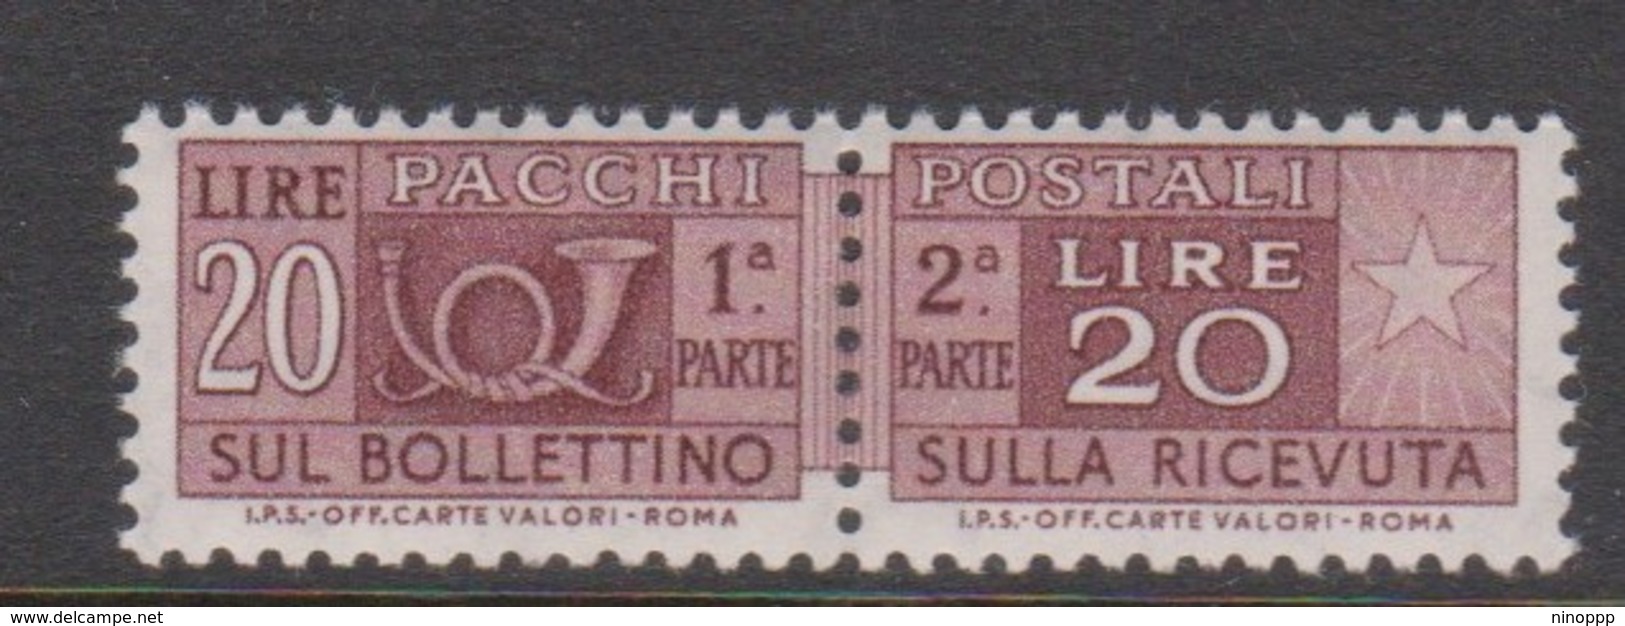 Italy PP 104 1973 Parcel Post 20 Lire Brown Lilac,mint  Hinged - Postal Parcels